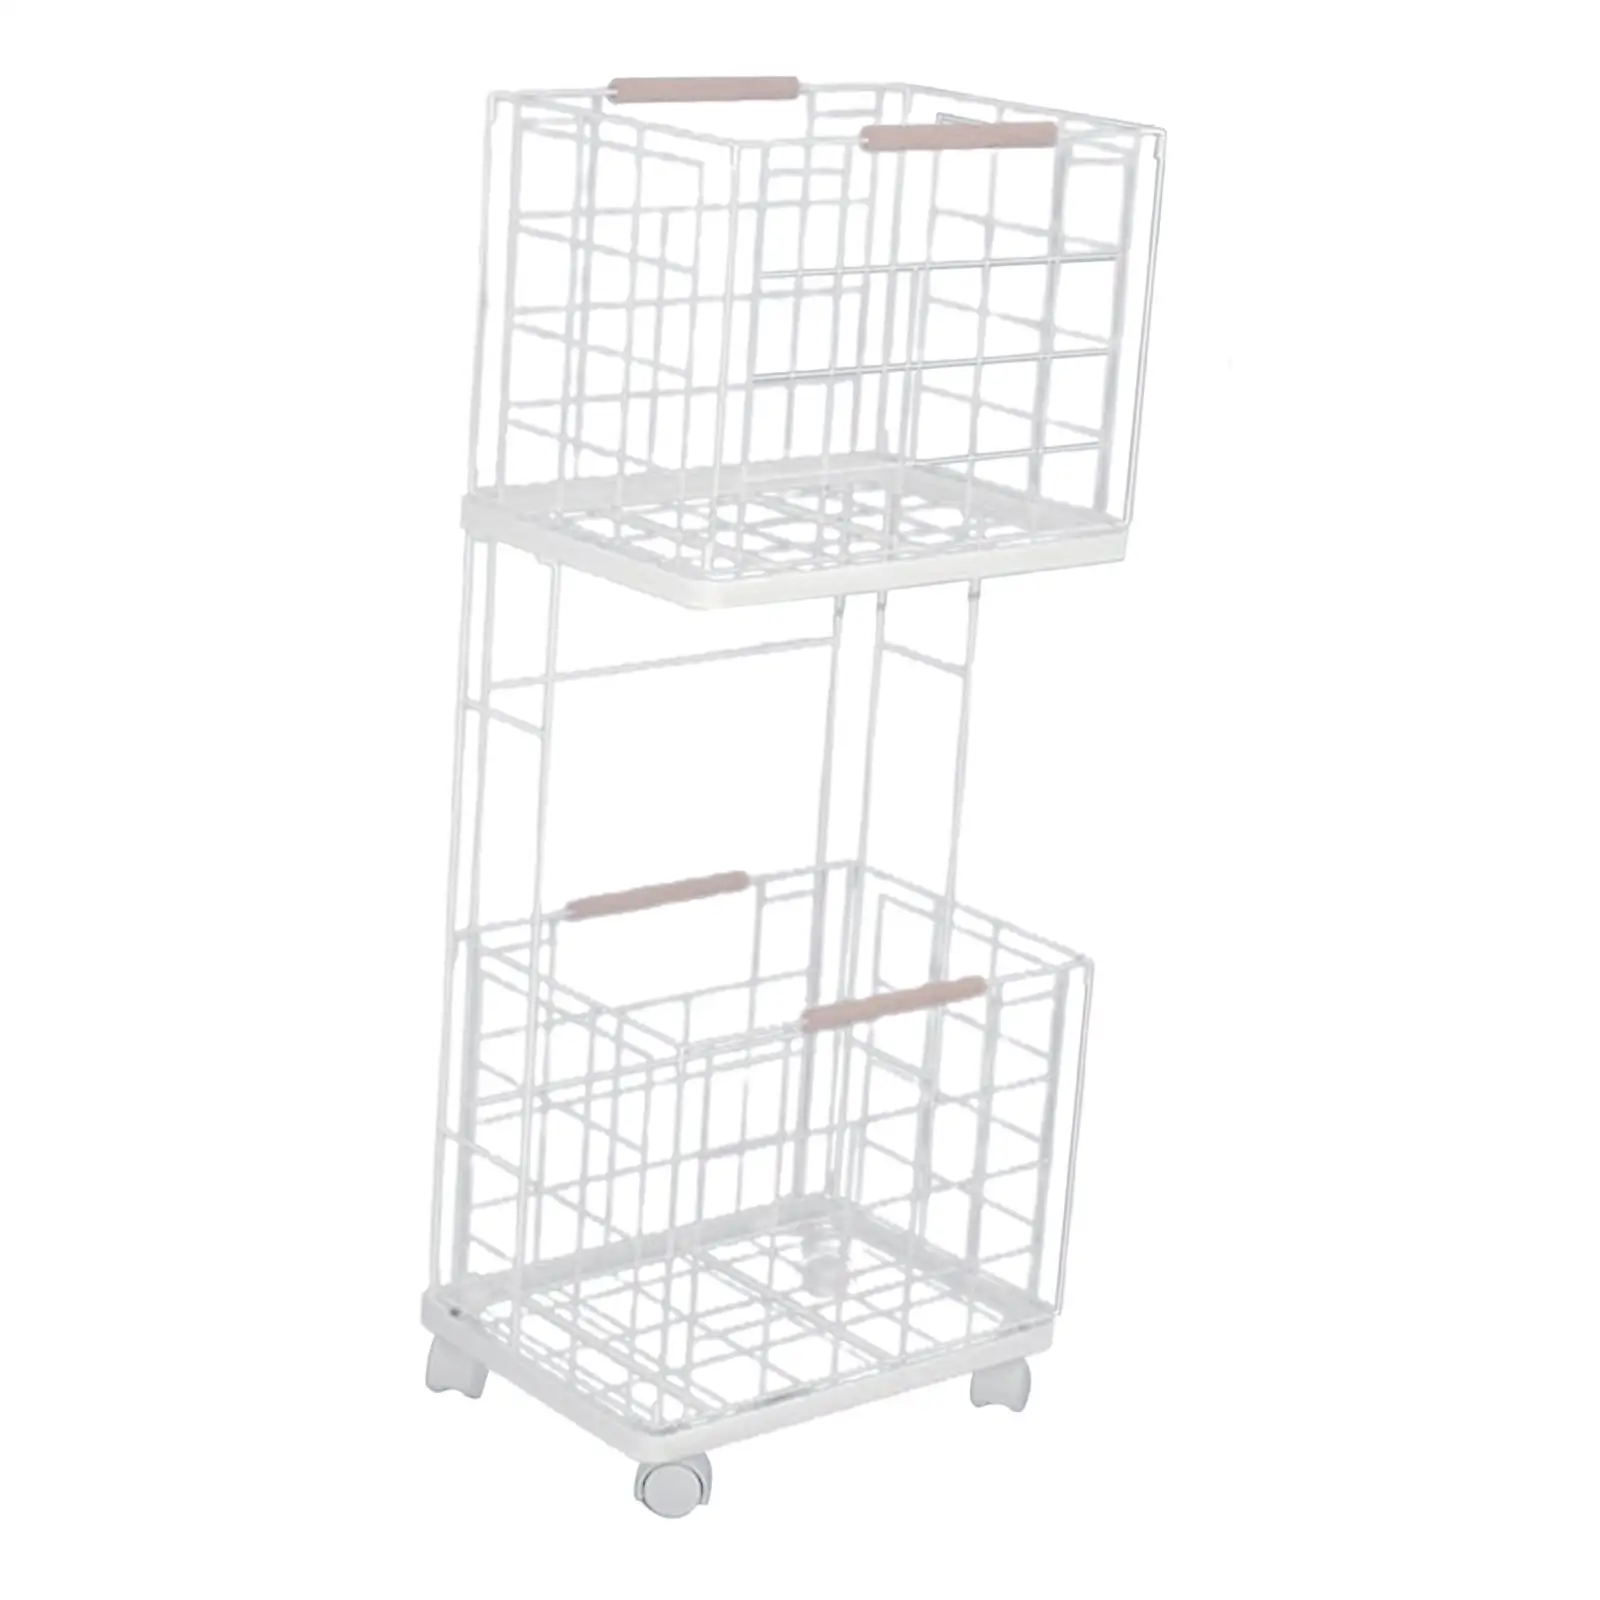 2 Tier Laundry Cart Removable Mobile Shelving Unit Storage Rack Laundry Clothes Basket for Bathrooom Home Farmhouse Kitchen